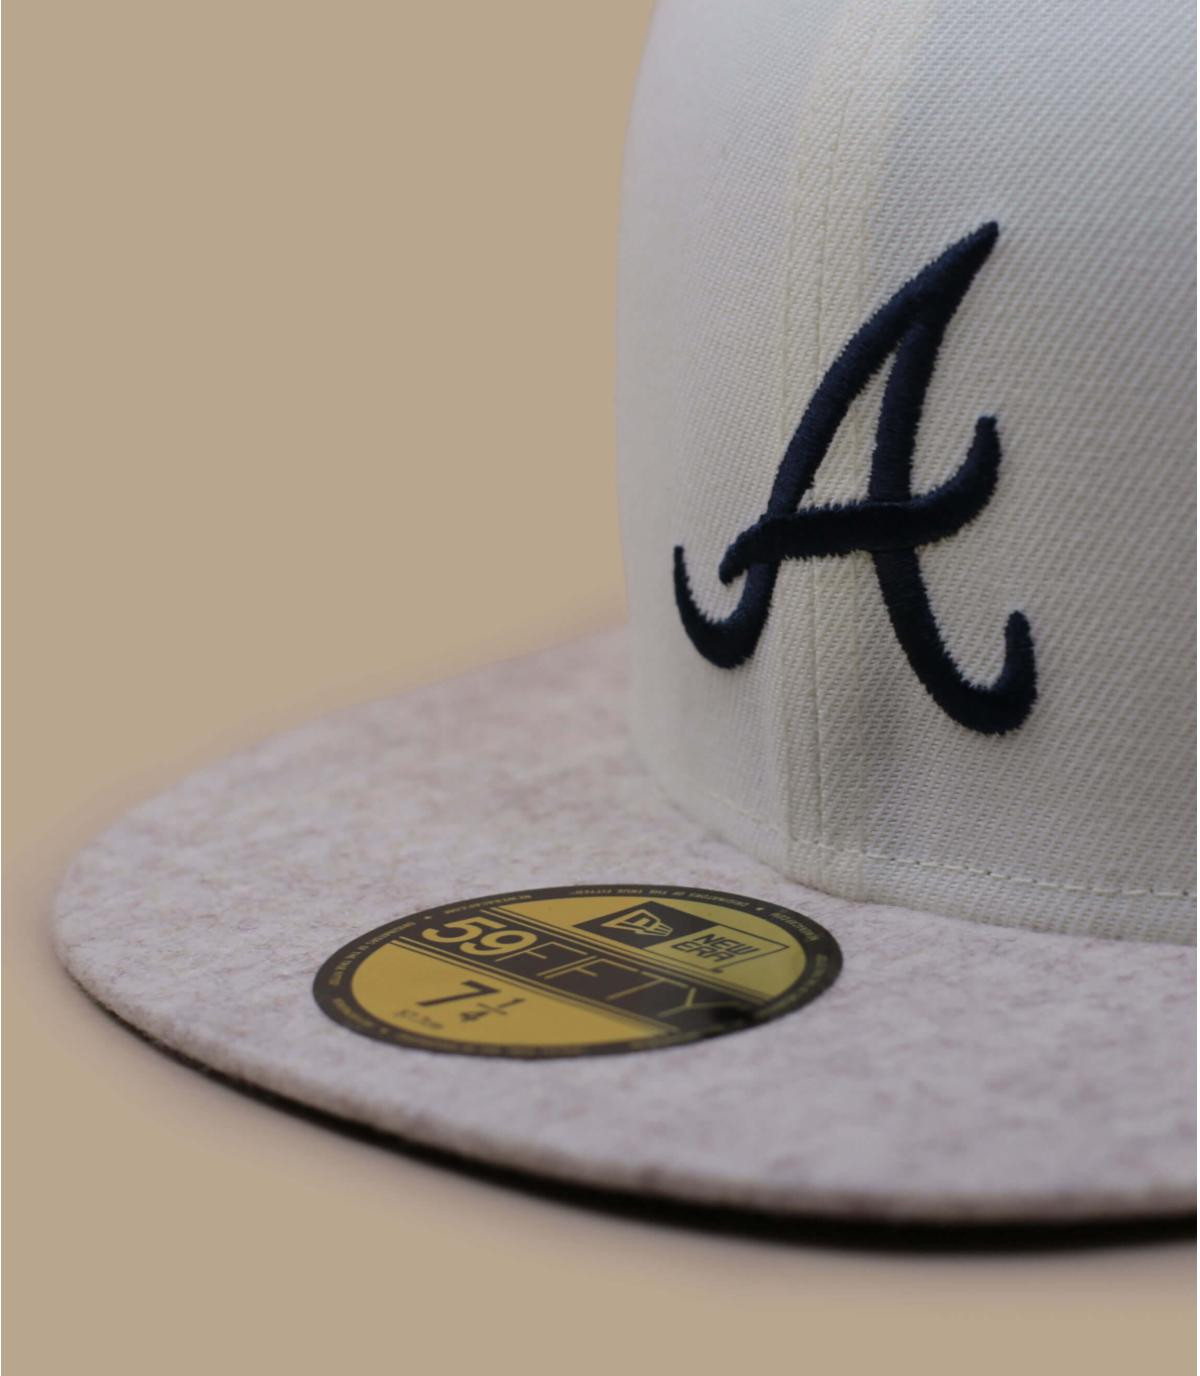 Atlanta Braves Match Up 59FIFTY Fitted Hat